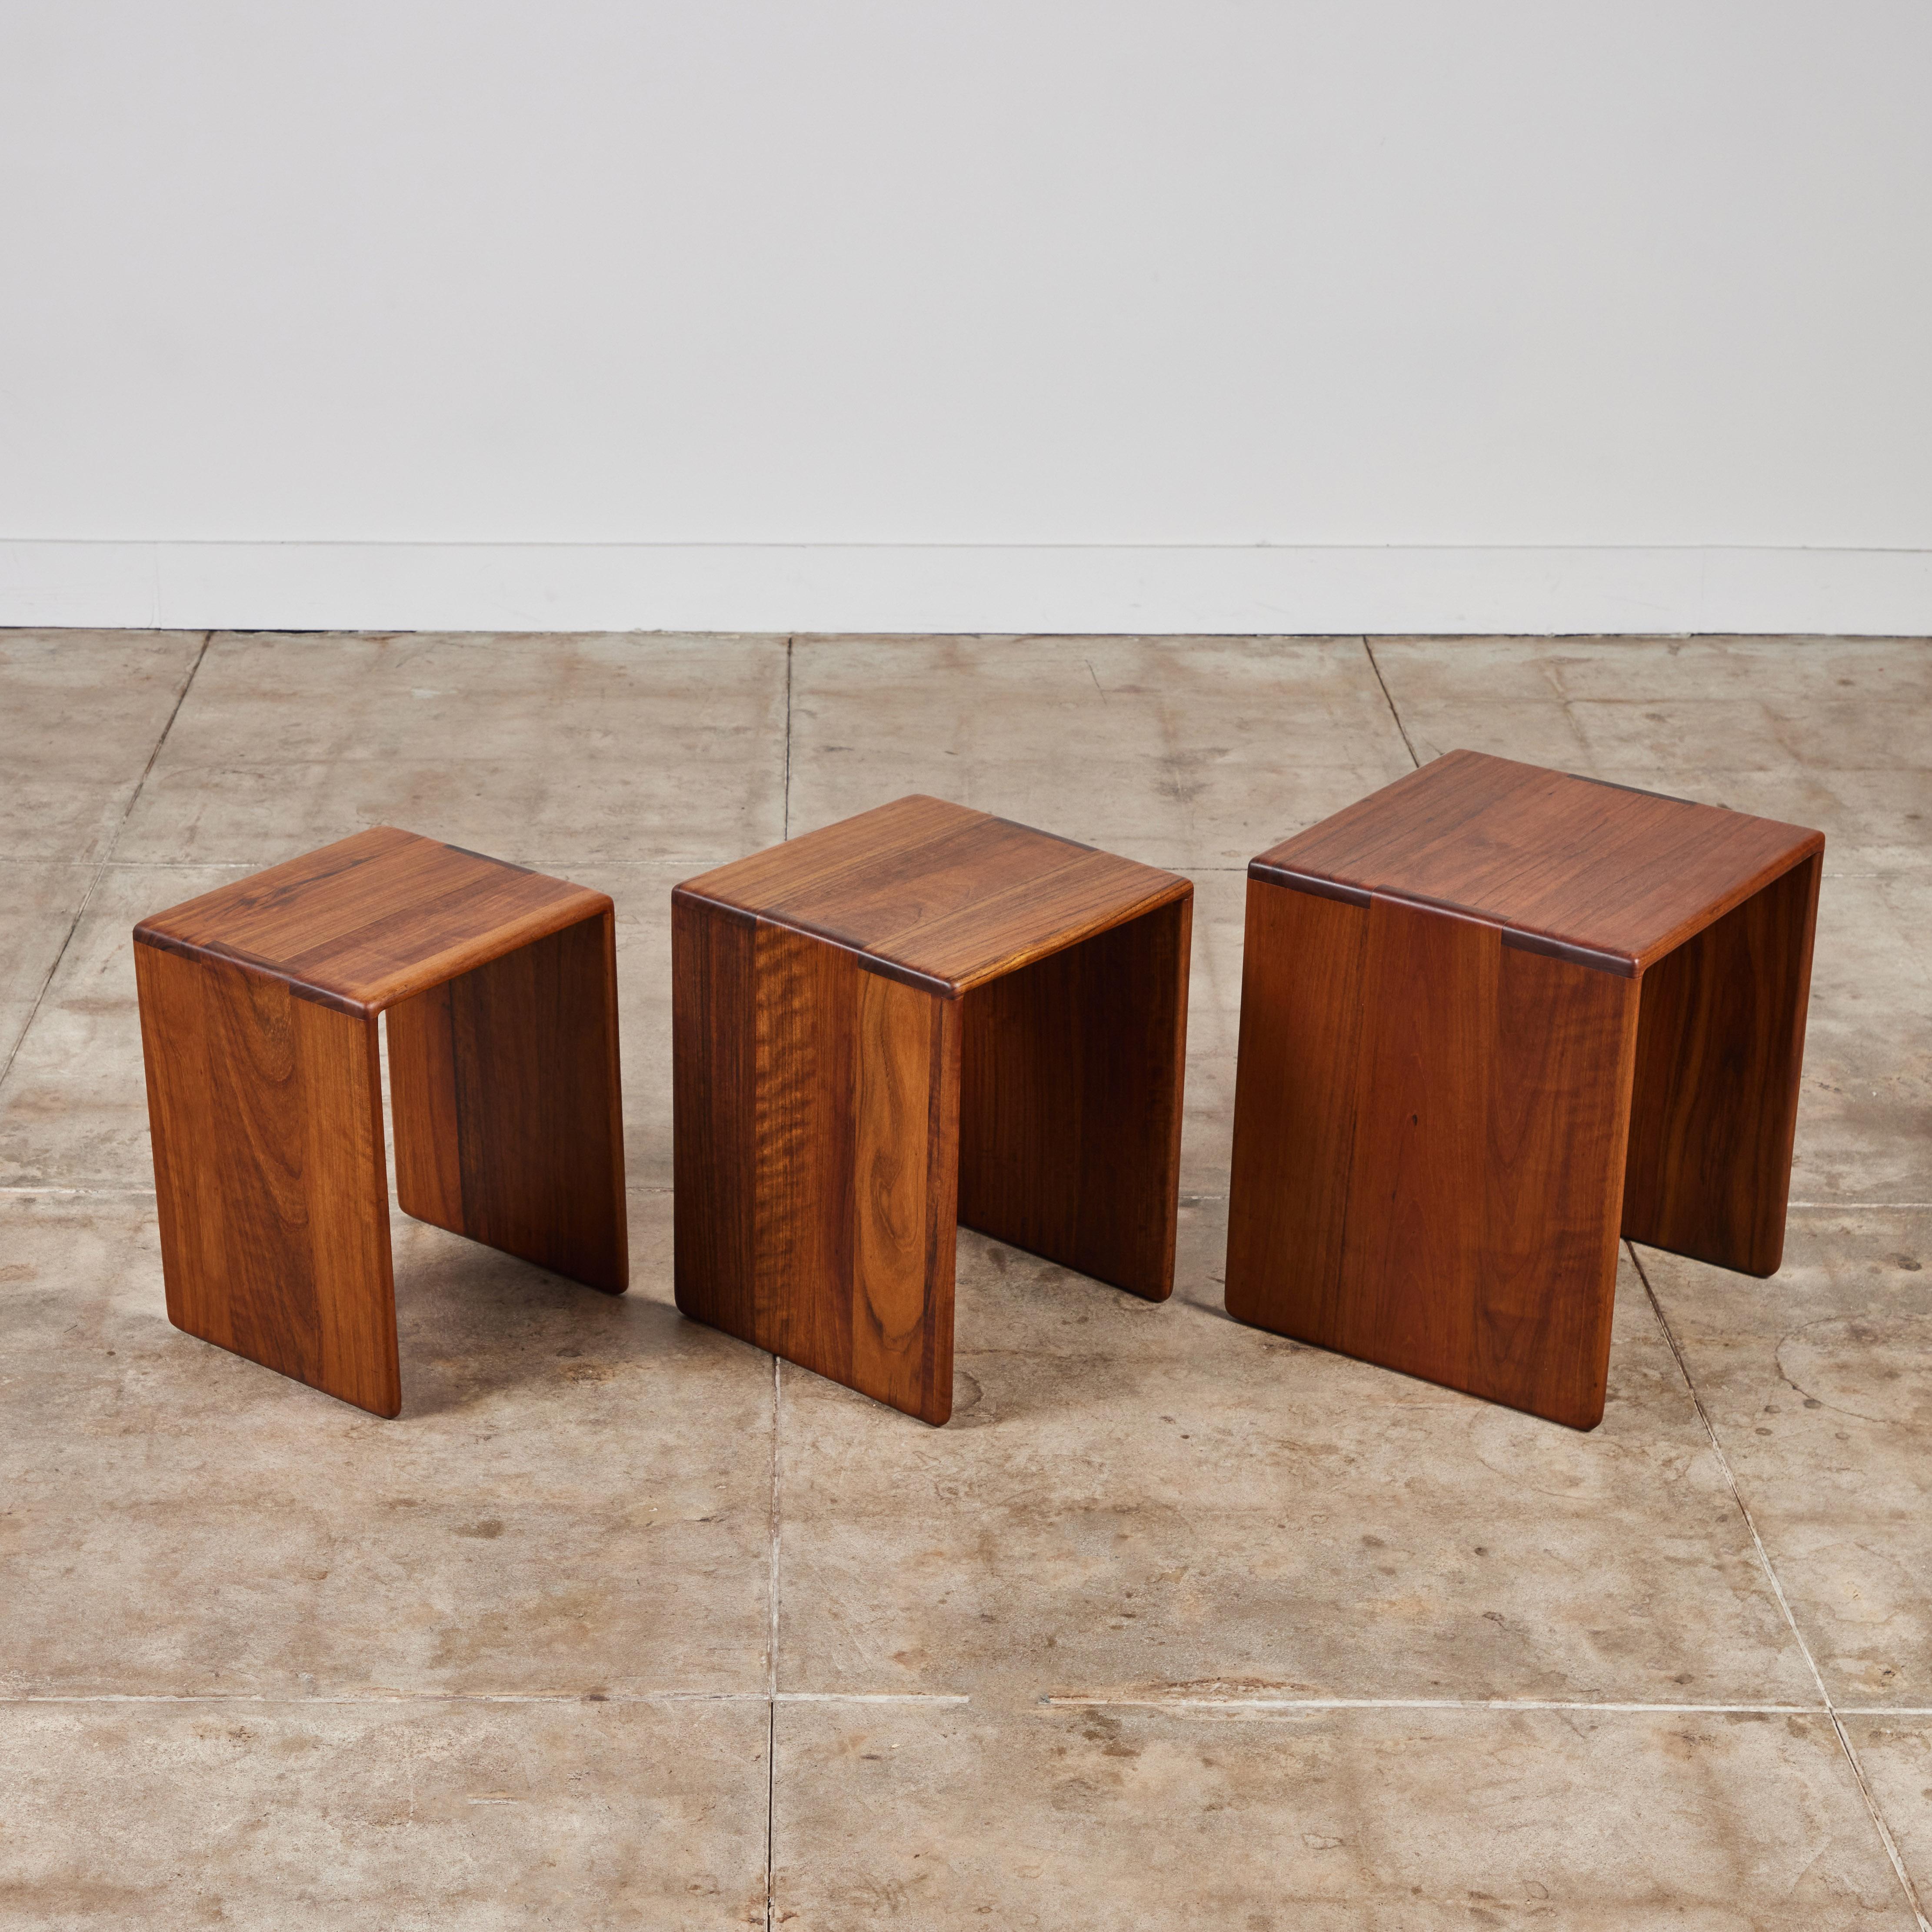 Set of three nesting tables in shedua wood from American designer Gerald McCabe for Eon Furniture, c.1970s. The tables have a waterfall shape with rounded edges finished with finger joinery. Each table displays a beautiful and unique wood grain. The